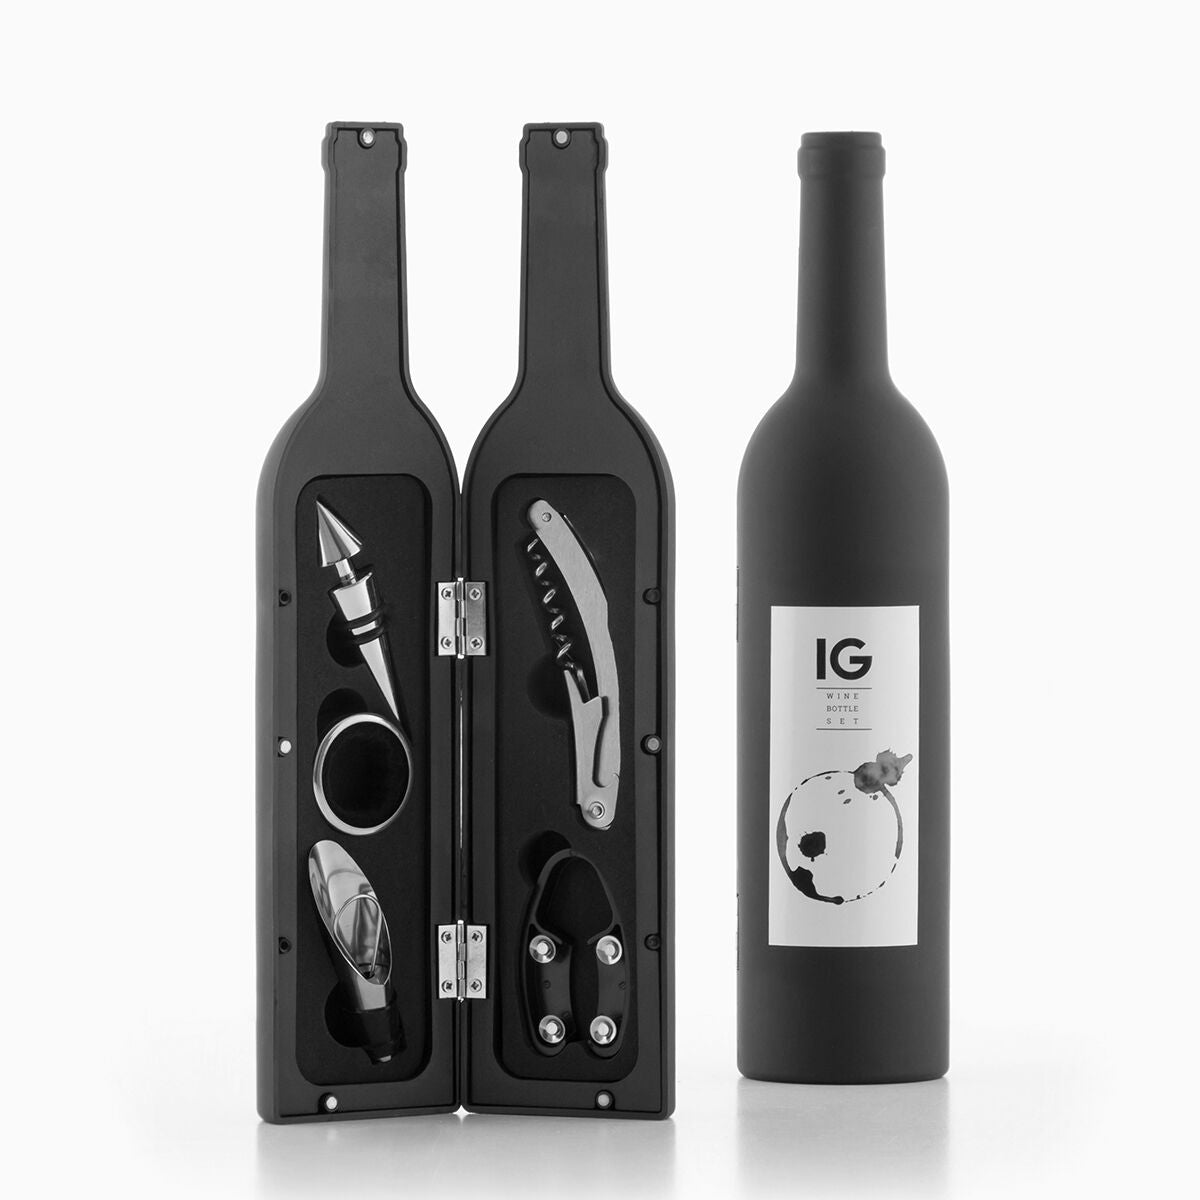 Wine bottle shape set with accessories